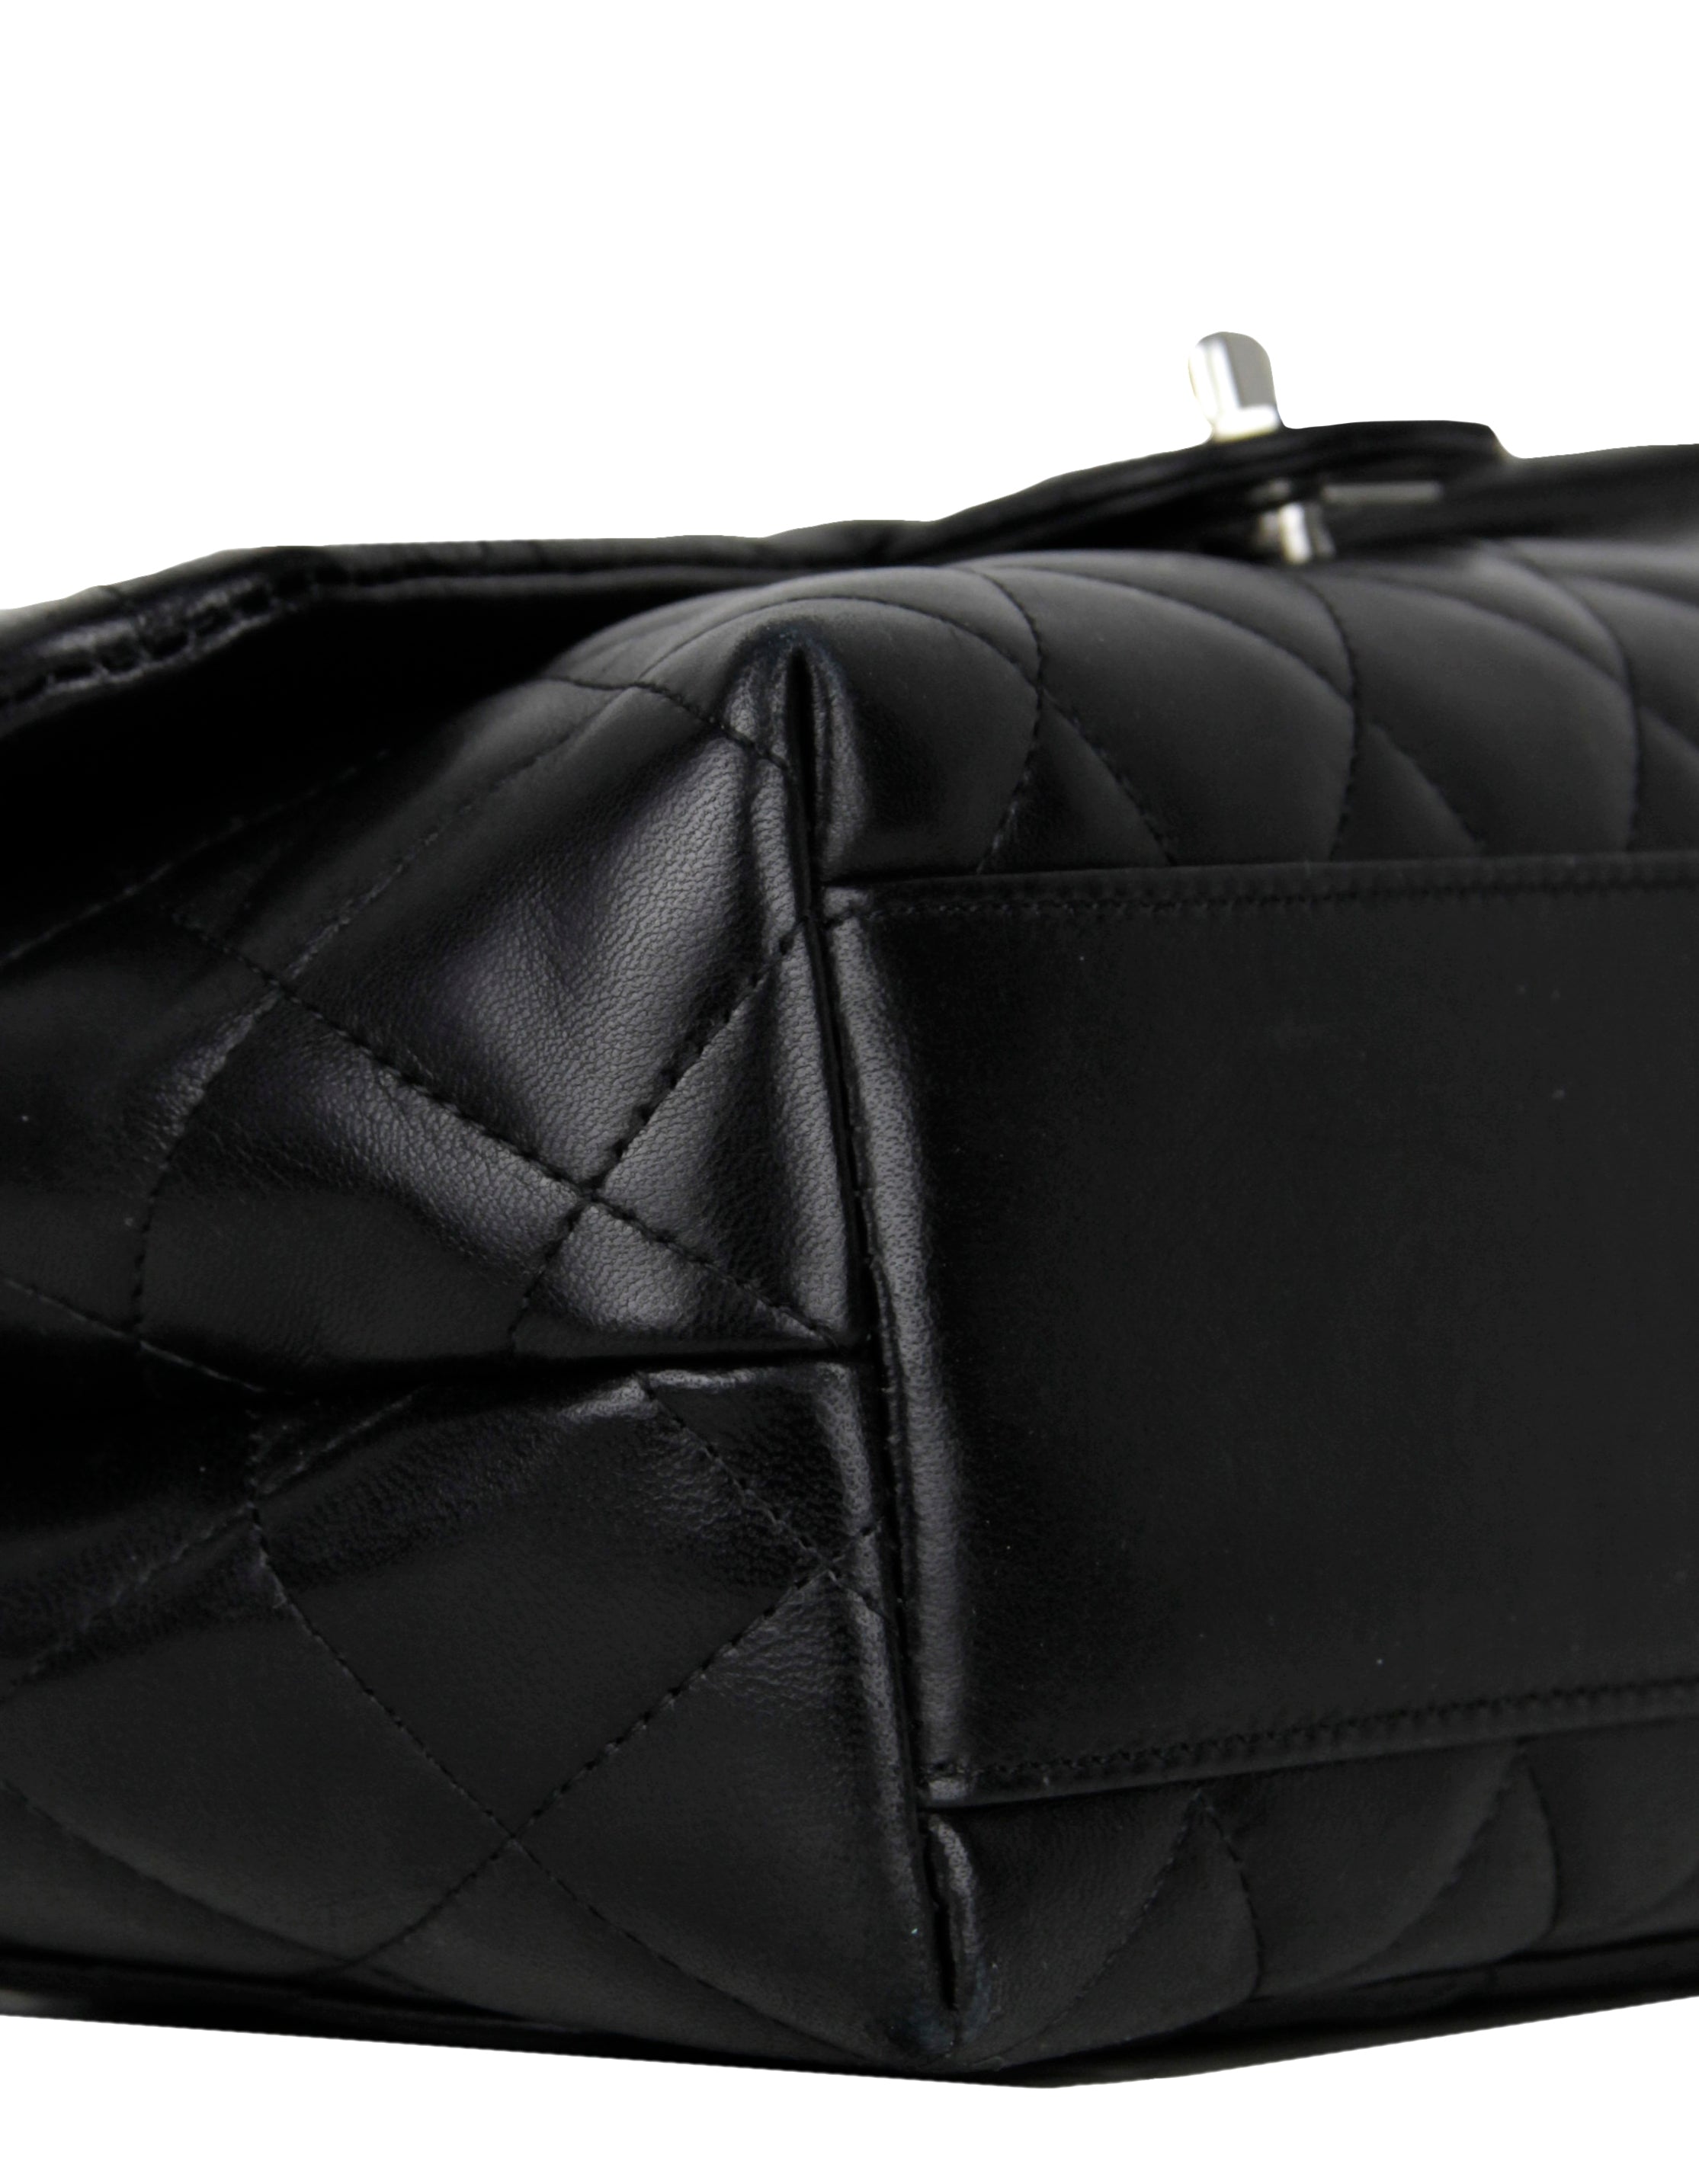 Chanel Black Lambskin Leather Kelly Style Classic Bag